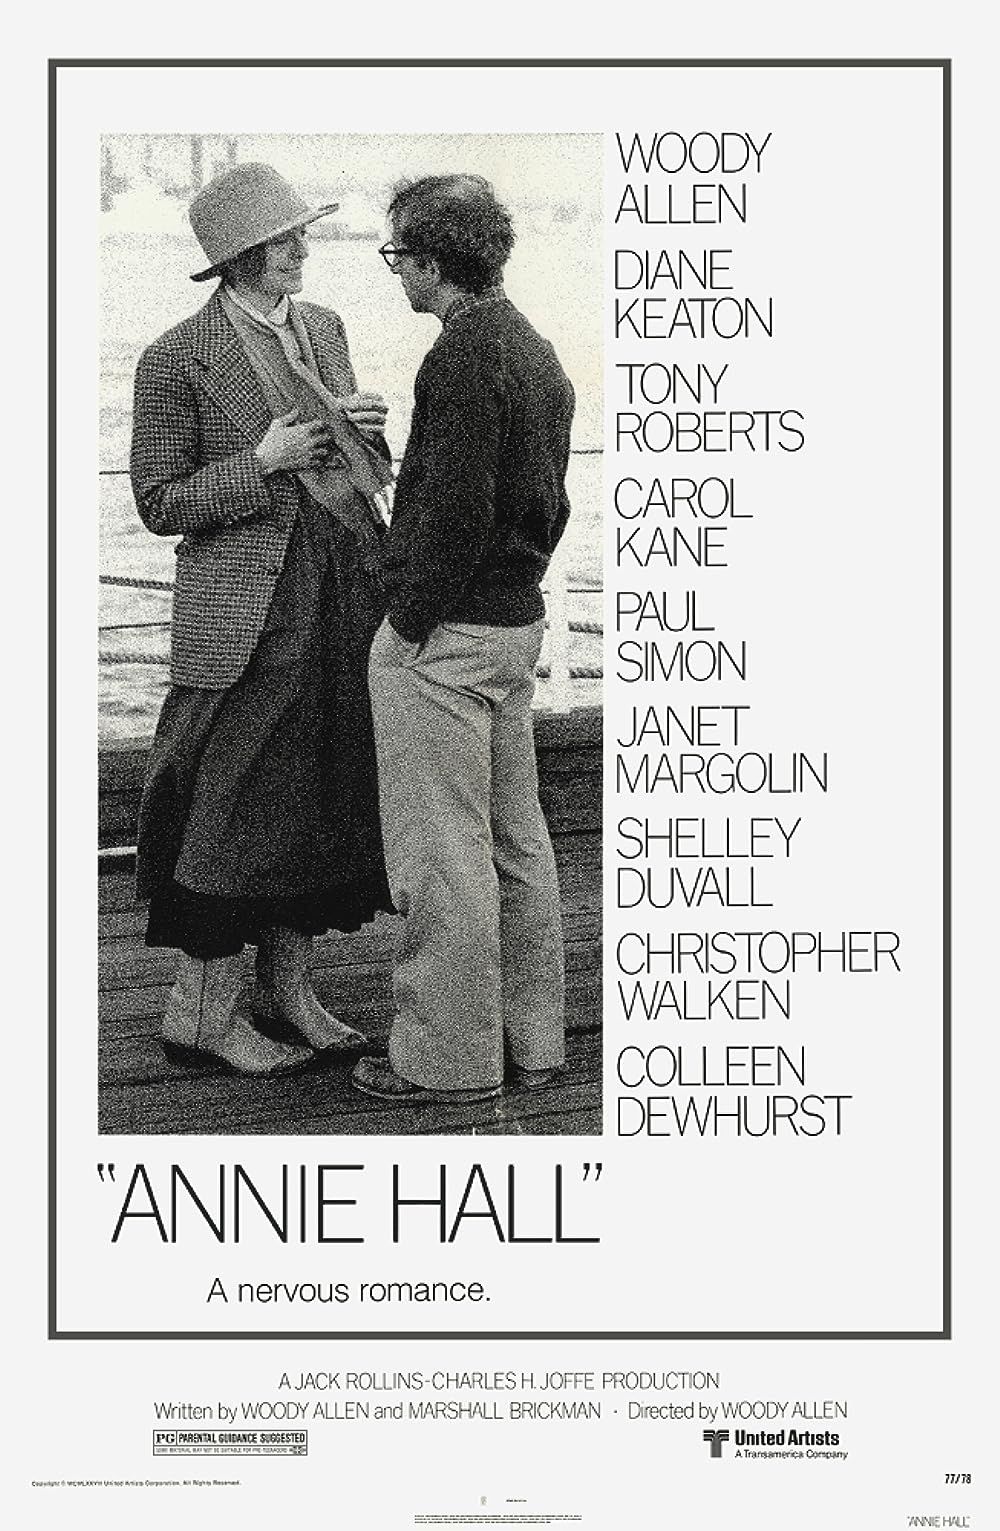 Diane Keaton and Woody Allen on the Annie Hall Poster